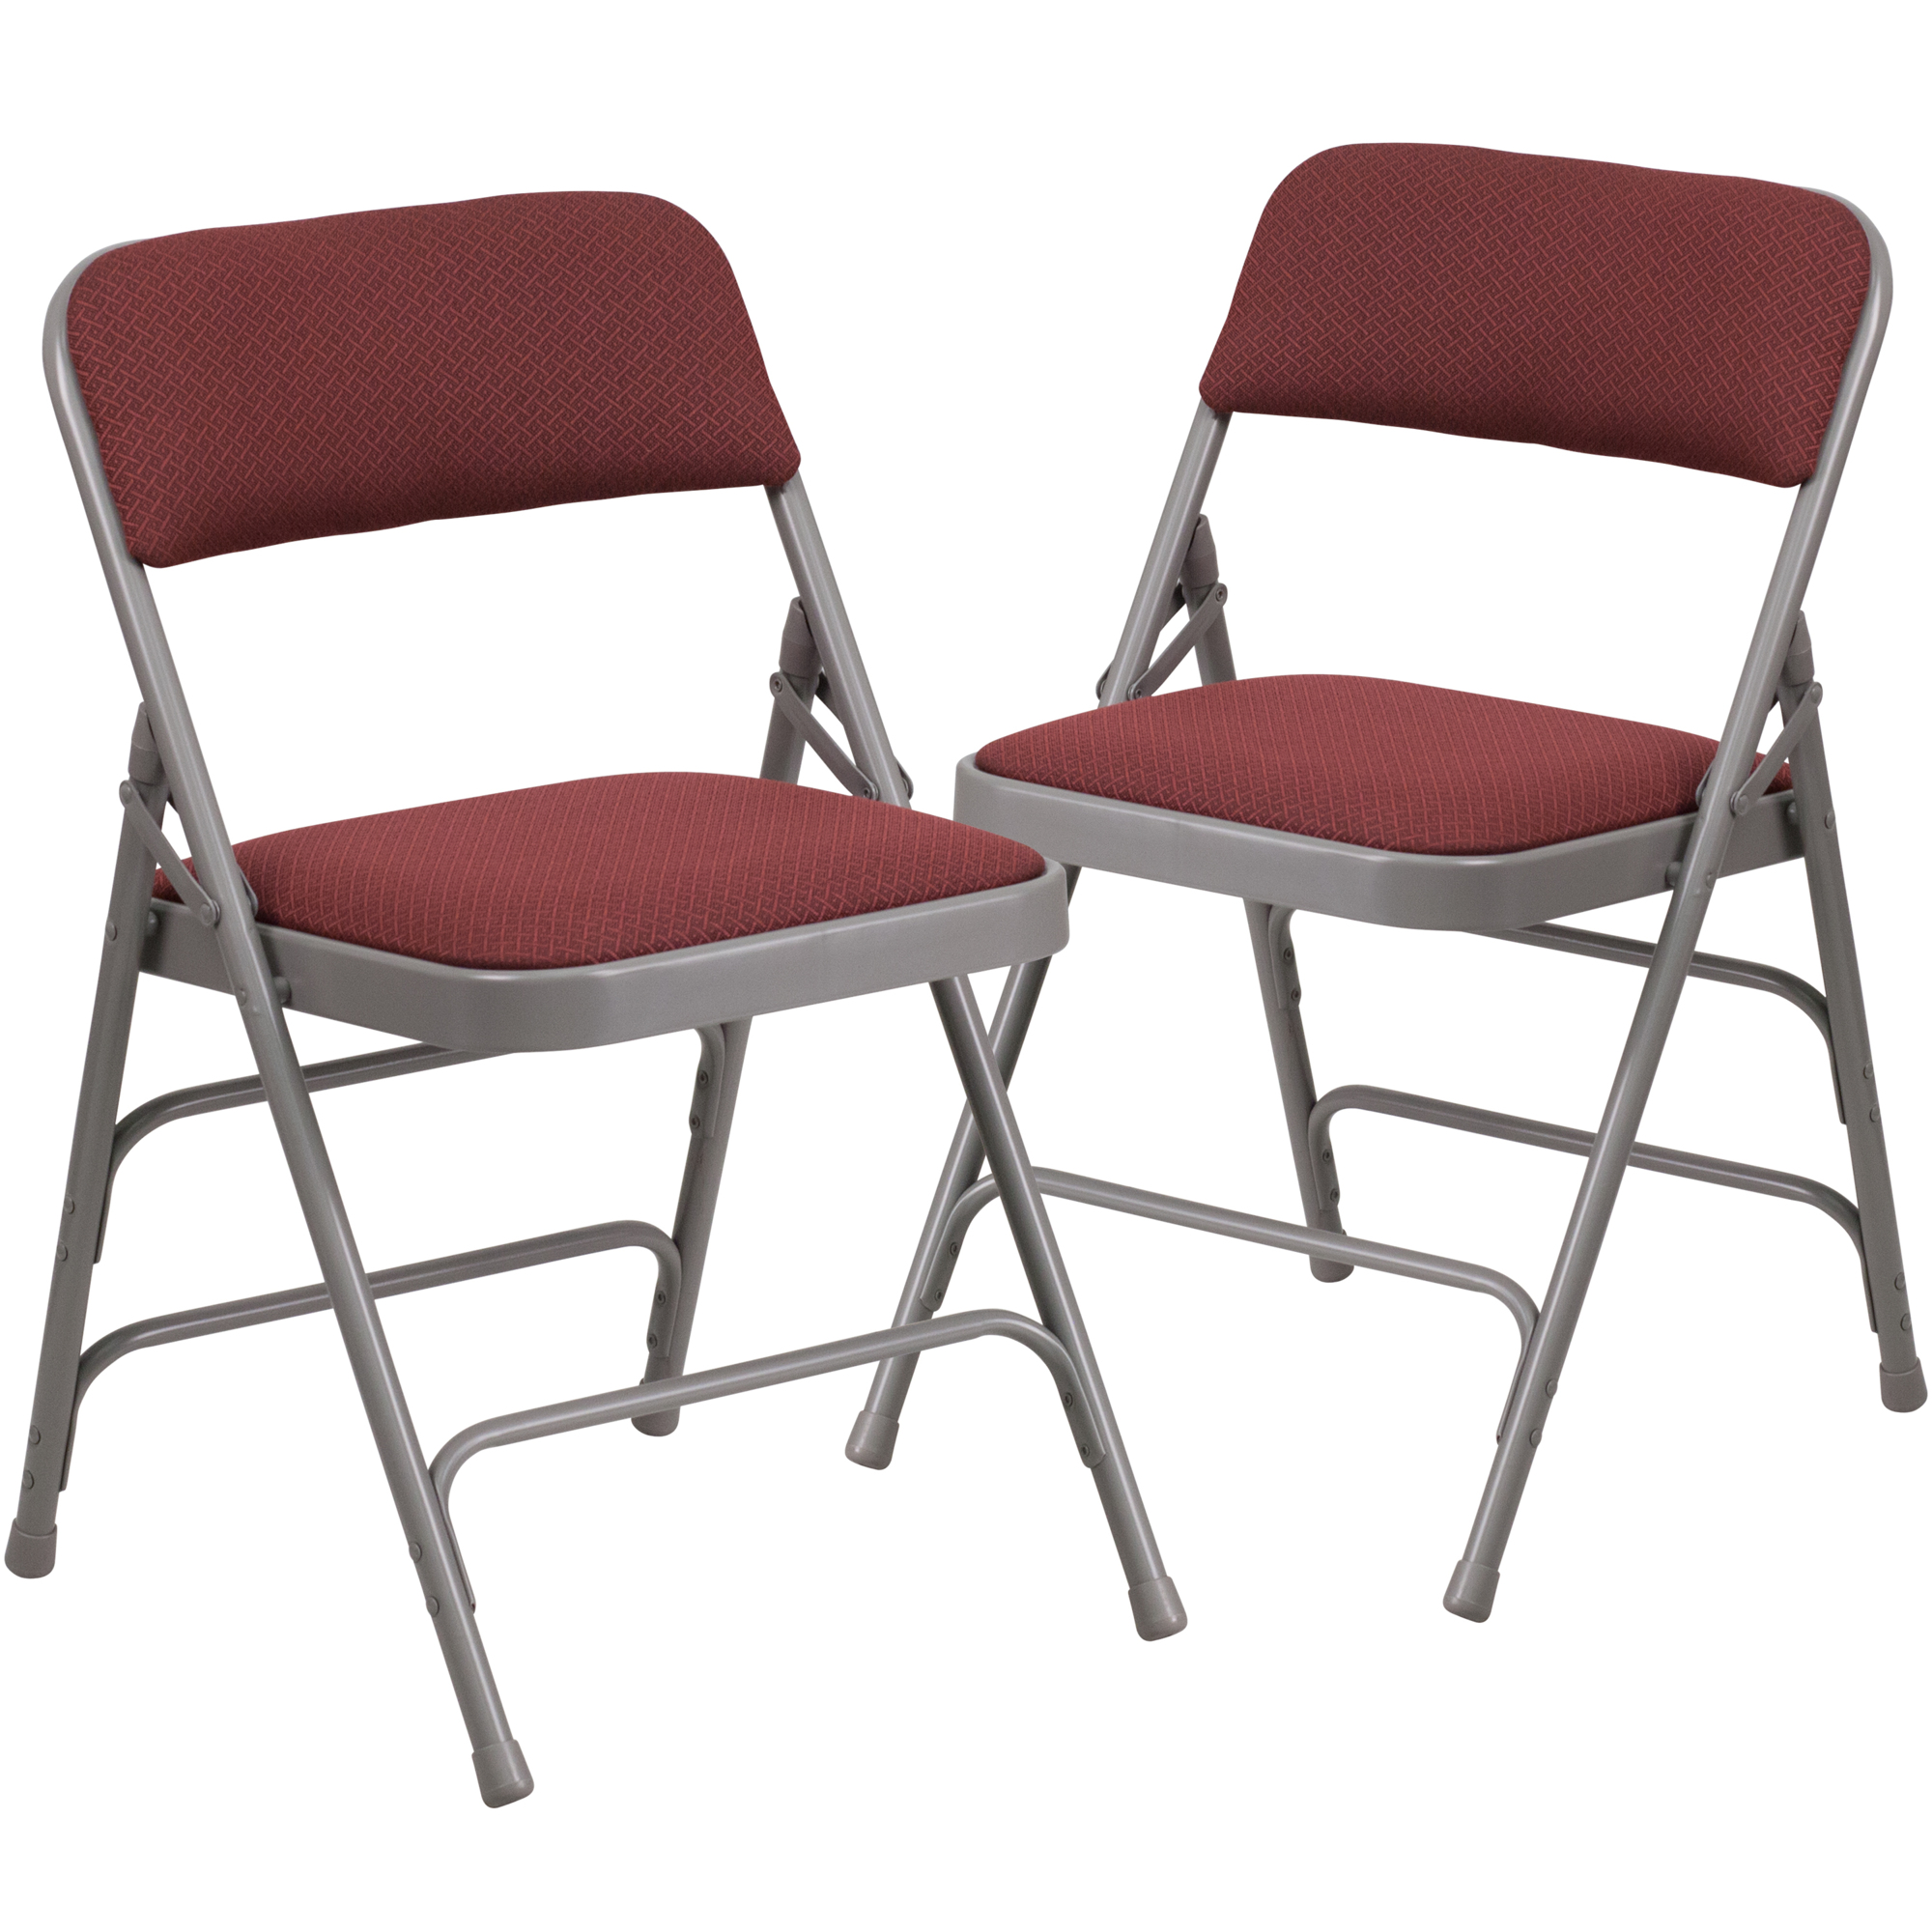 Flash Furniture, 2PK Burgundy Patterned Fabric Metal Folding Chair, Primary Color Burgundy, Included (qty.) 2, Model 2AWMC309AFBG